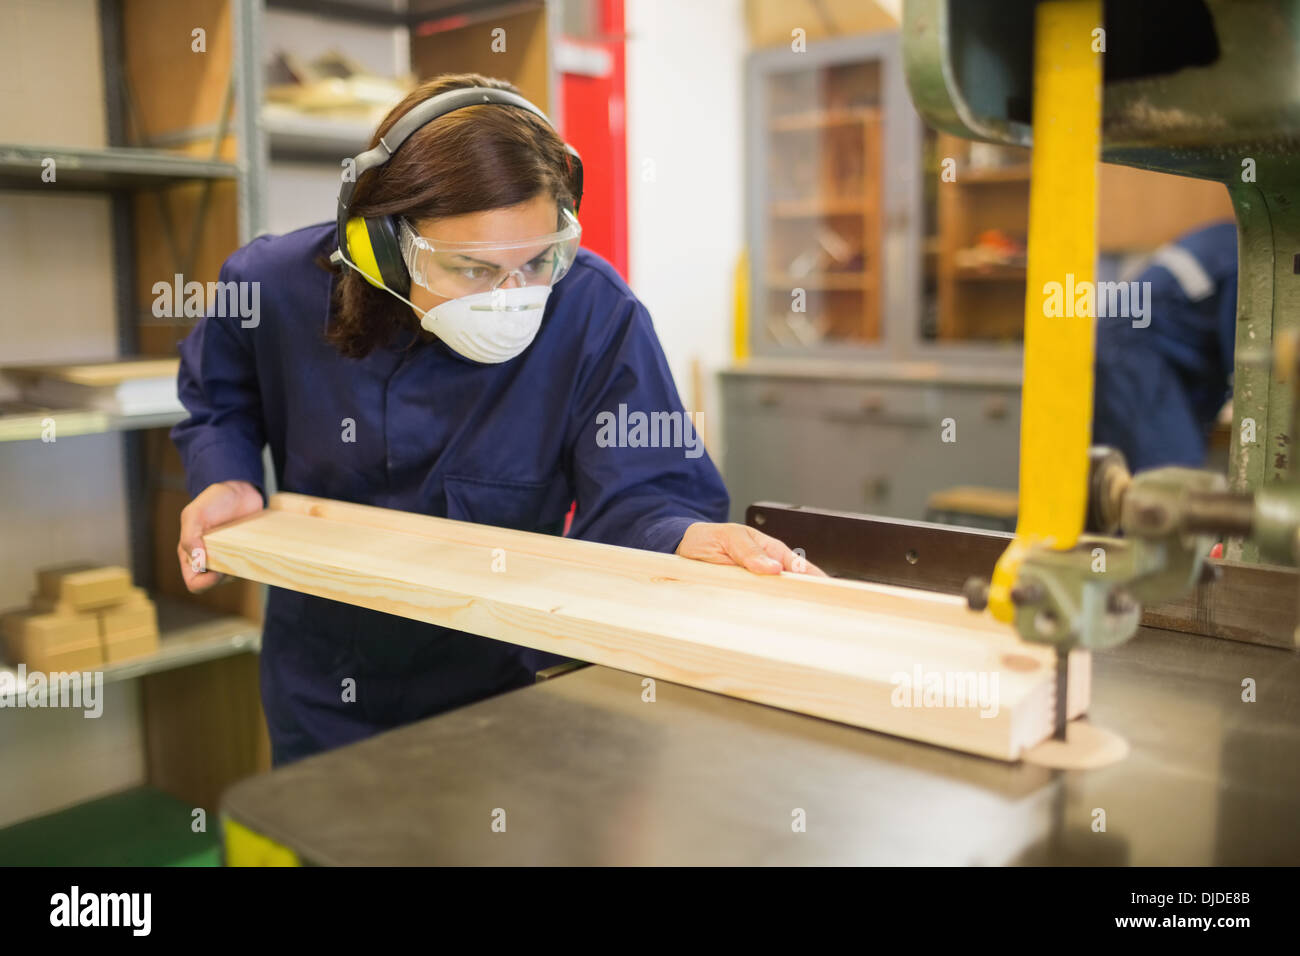 Trainee wearing safety protection using saw Stock Photo